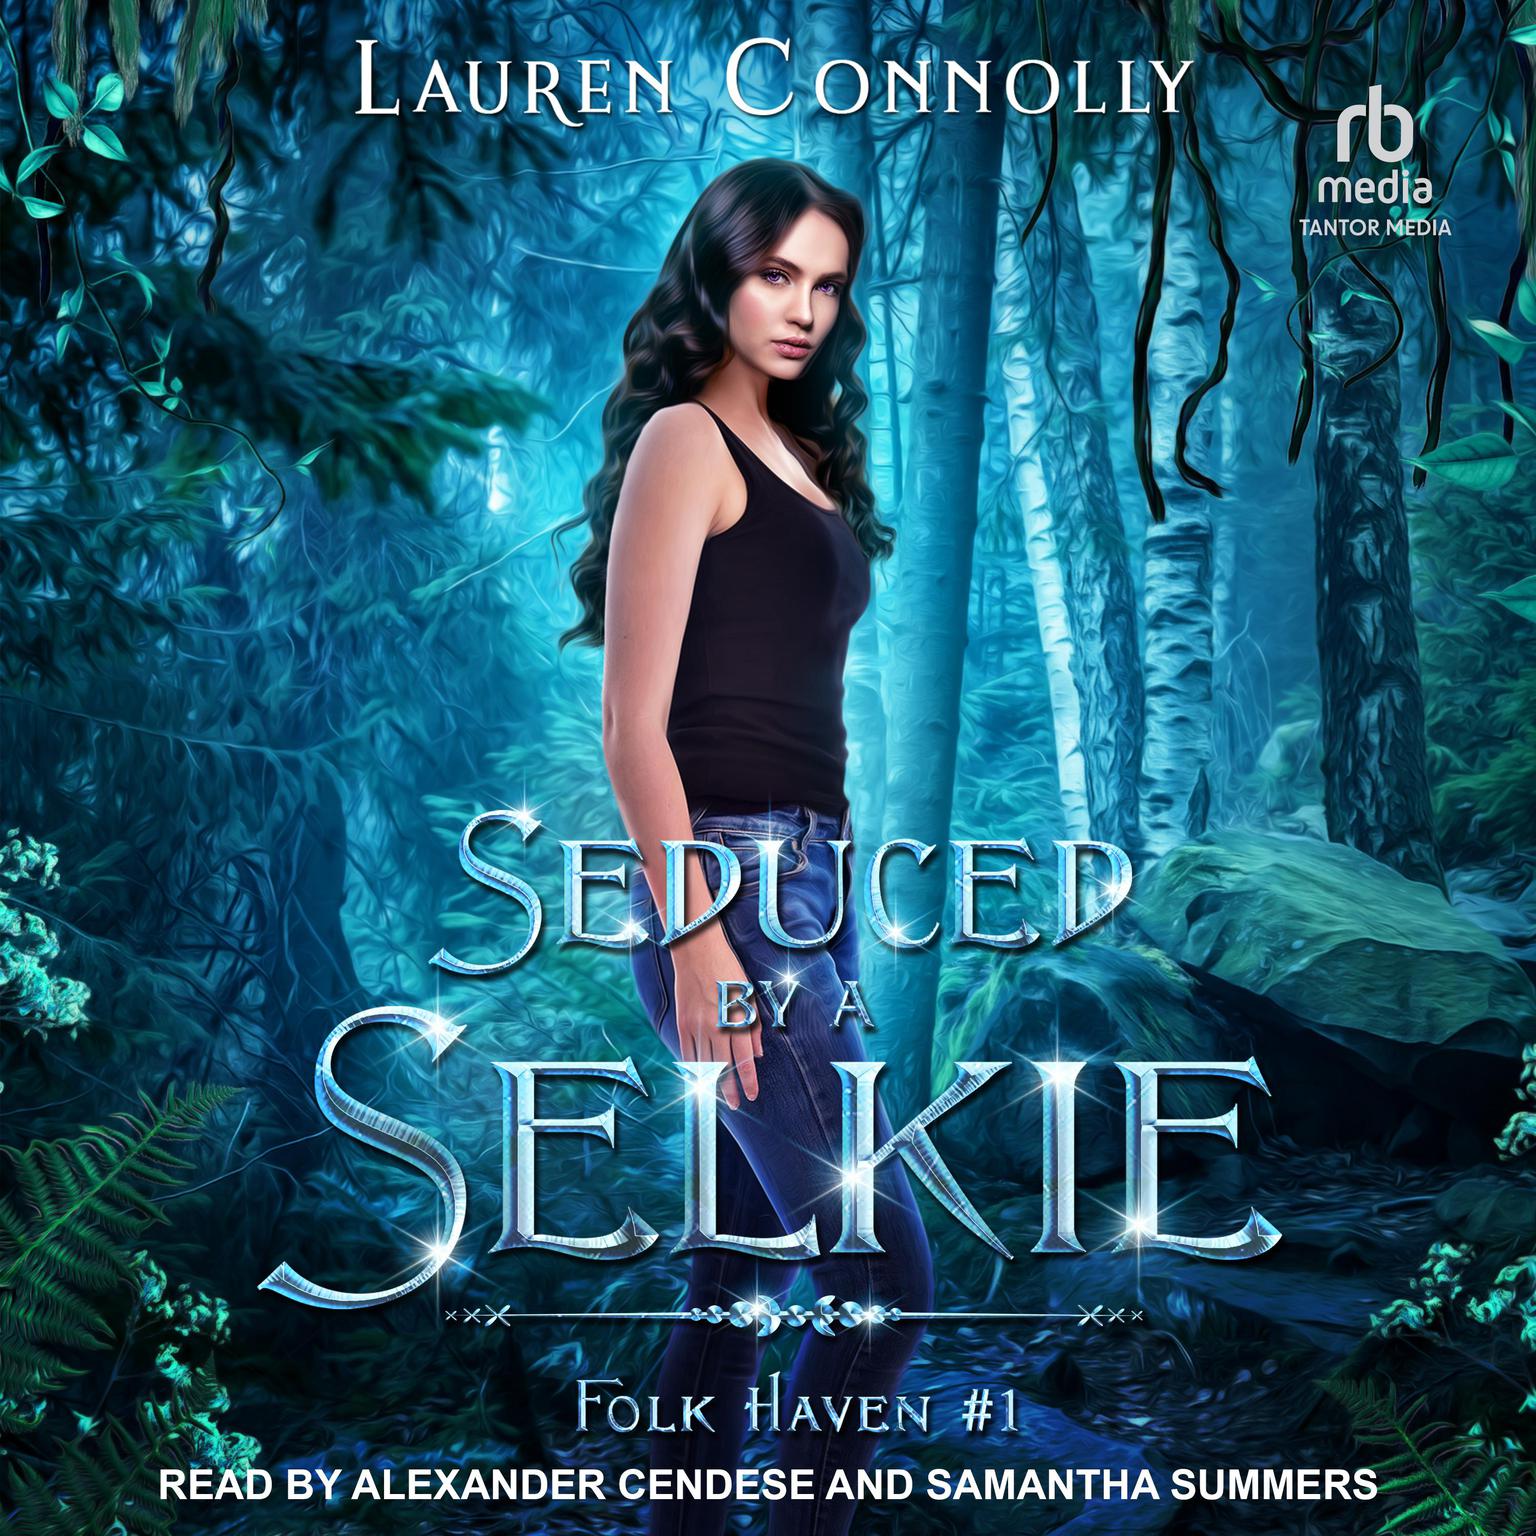 Seduced by A Selkie Audiobook, by Lauren Connolly